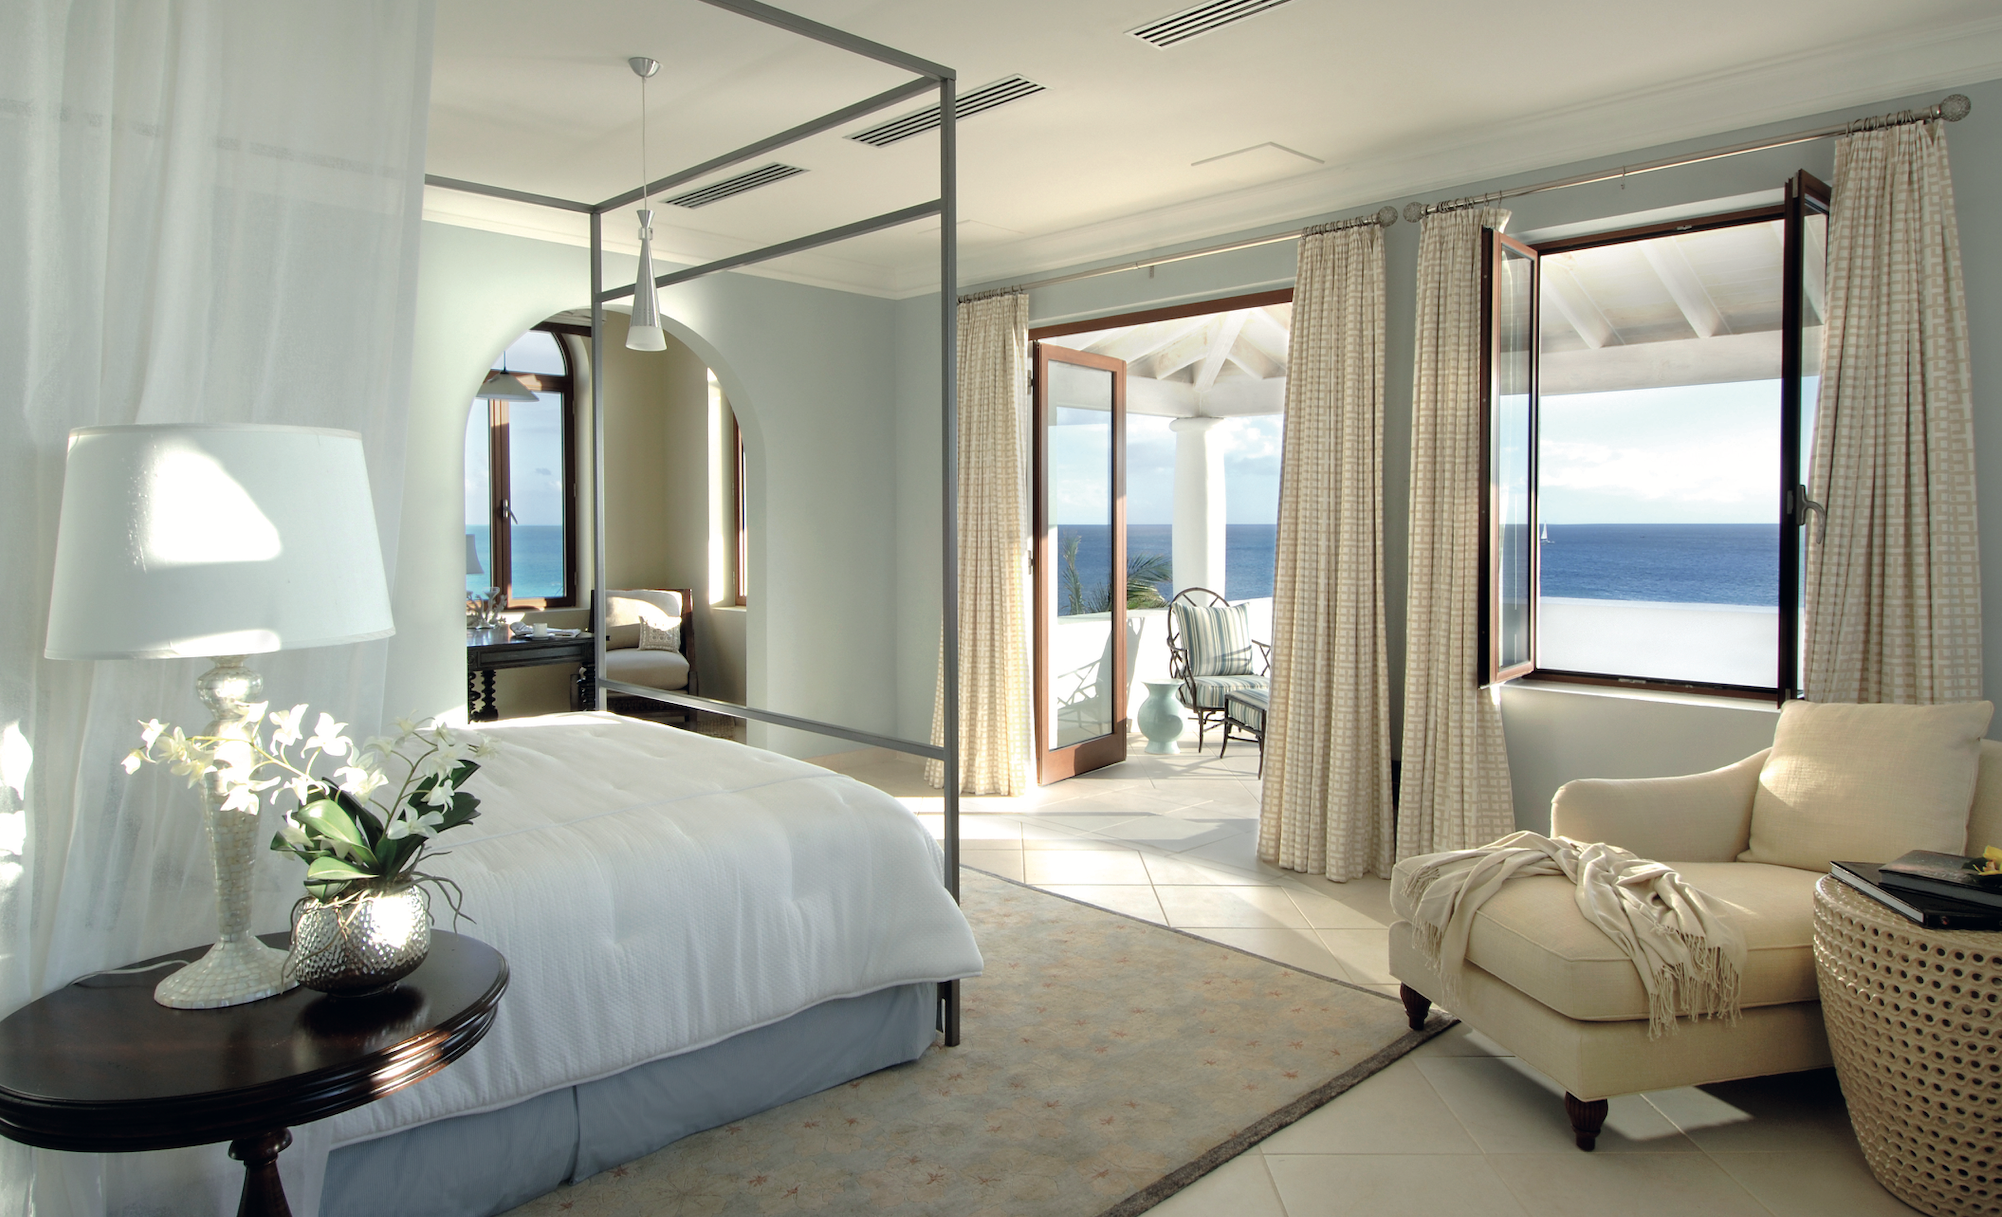   One of the bedrooms inside a private villa (photo credit: Belmond)  